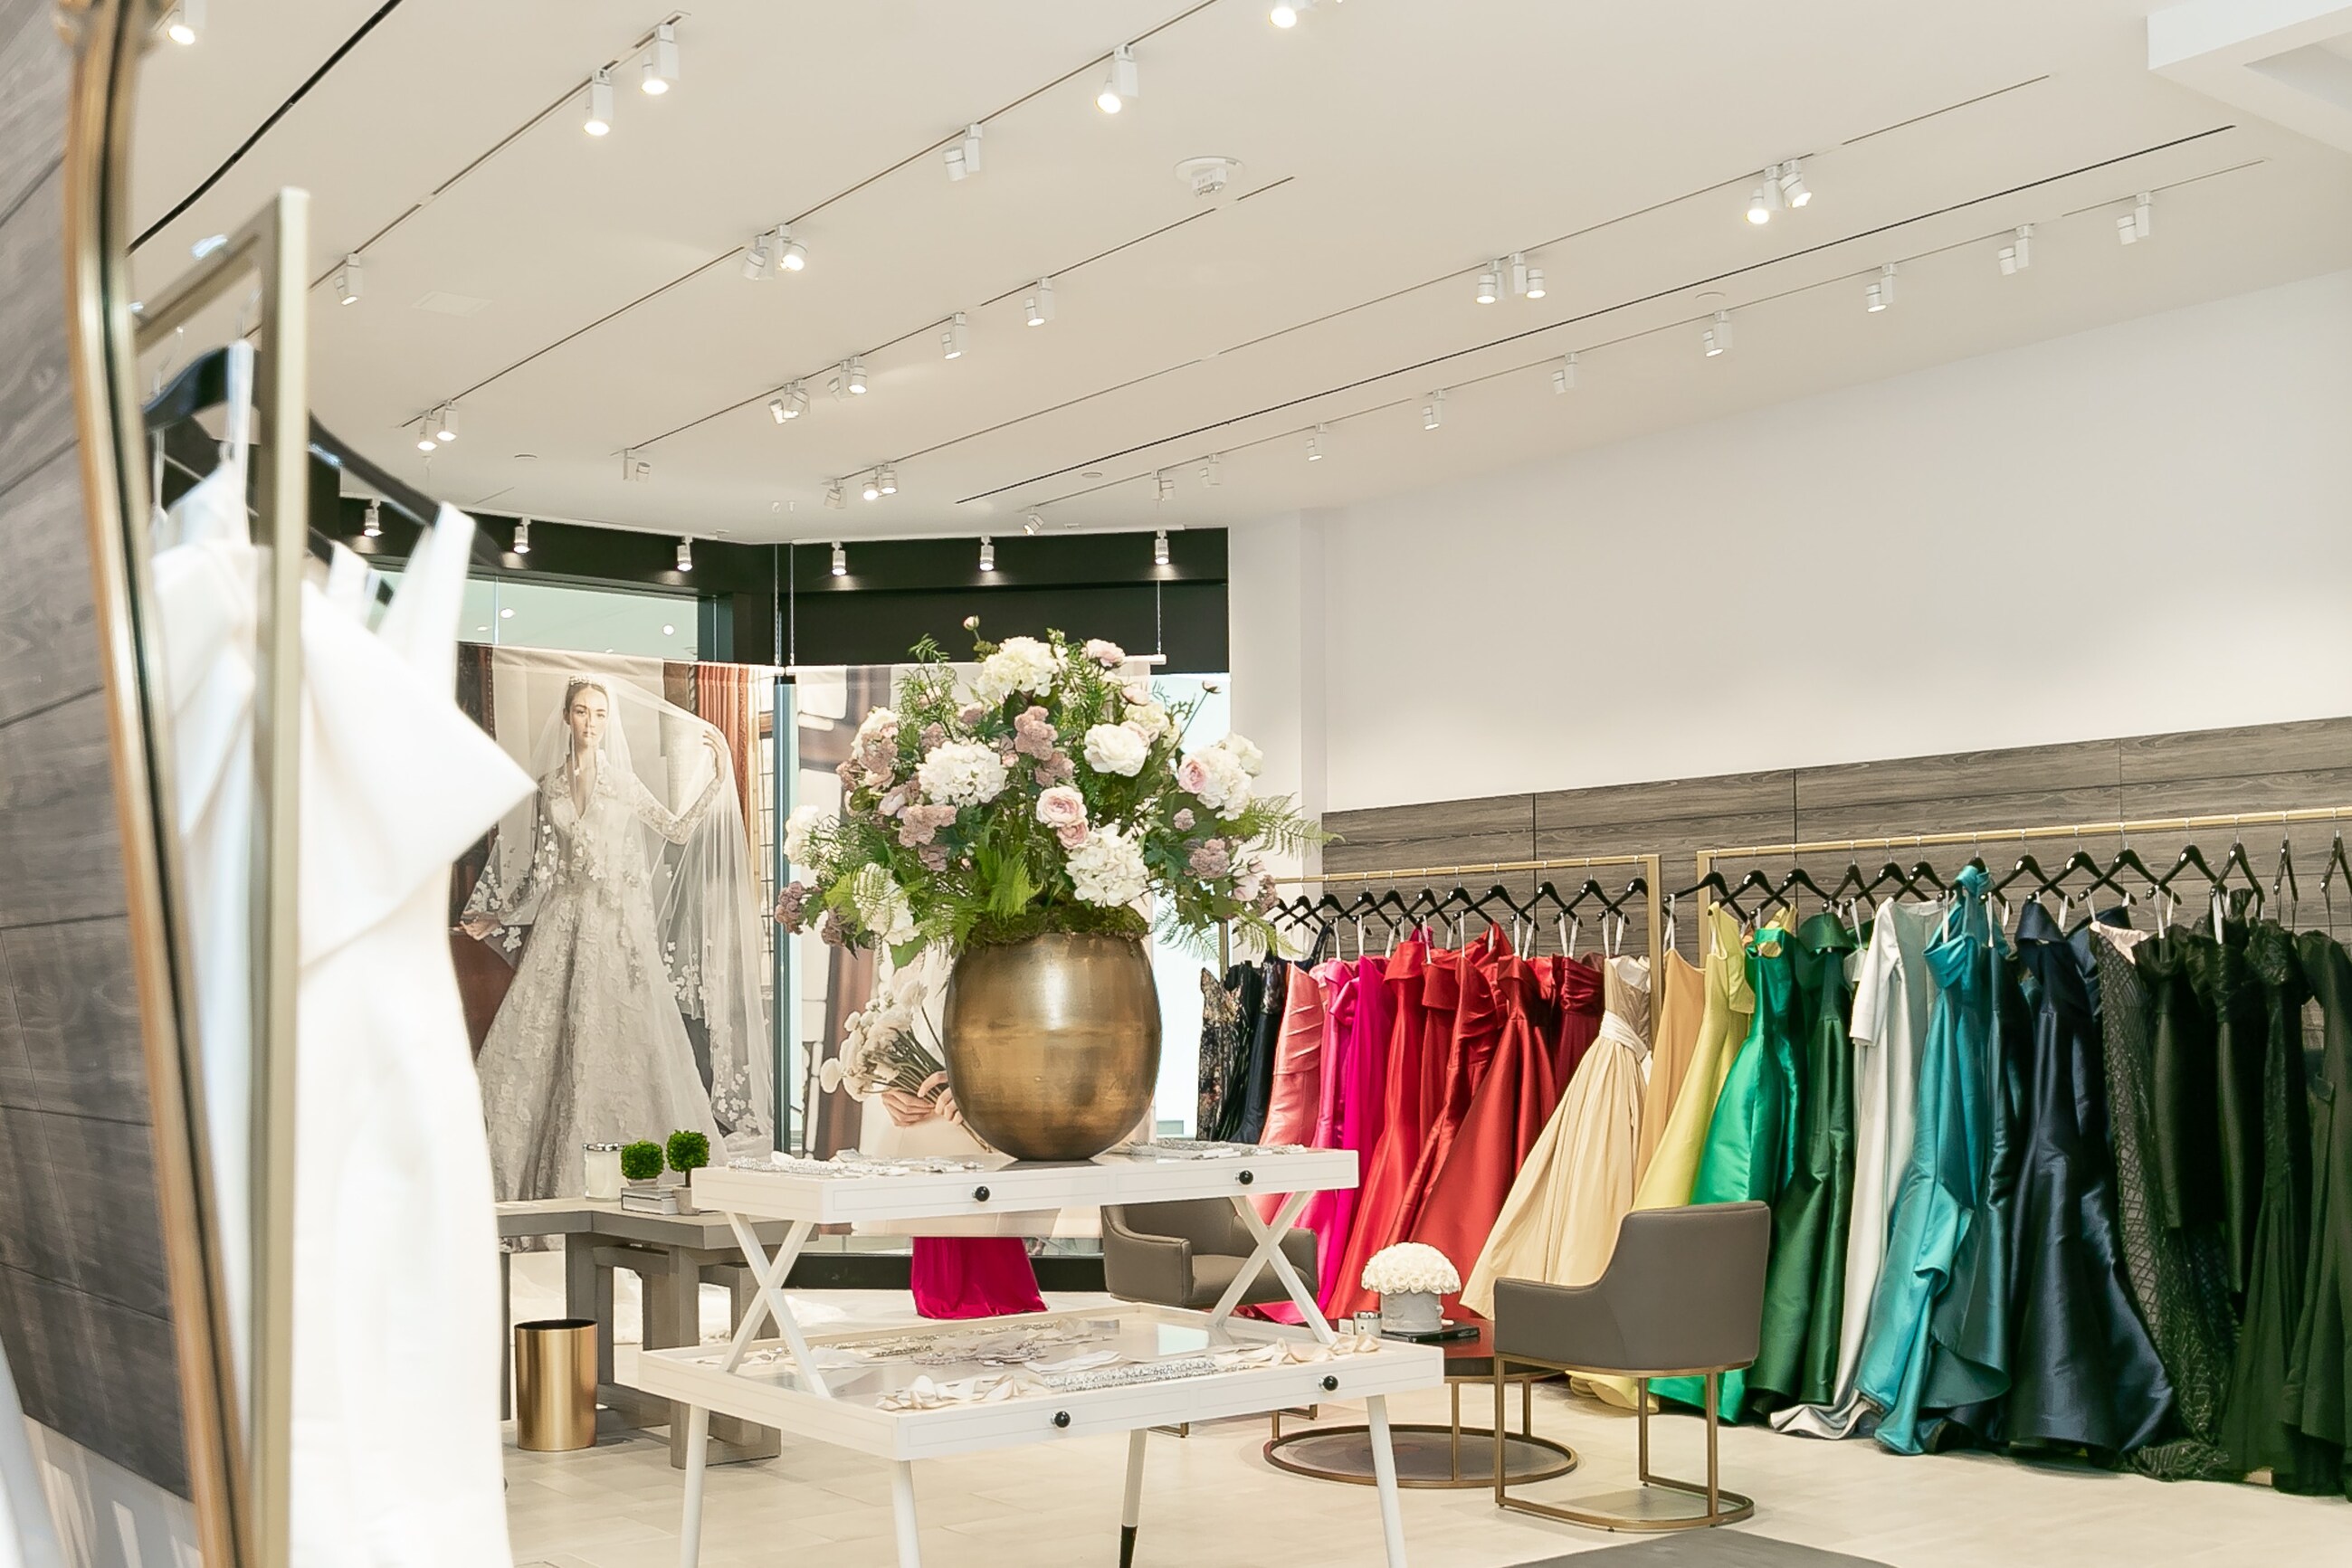 Photo of the showroom interior with a gowns